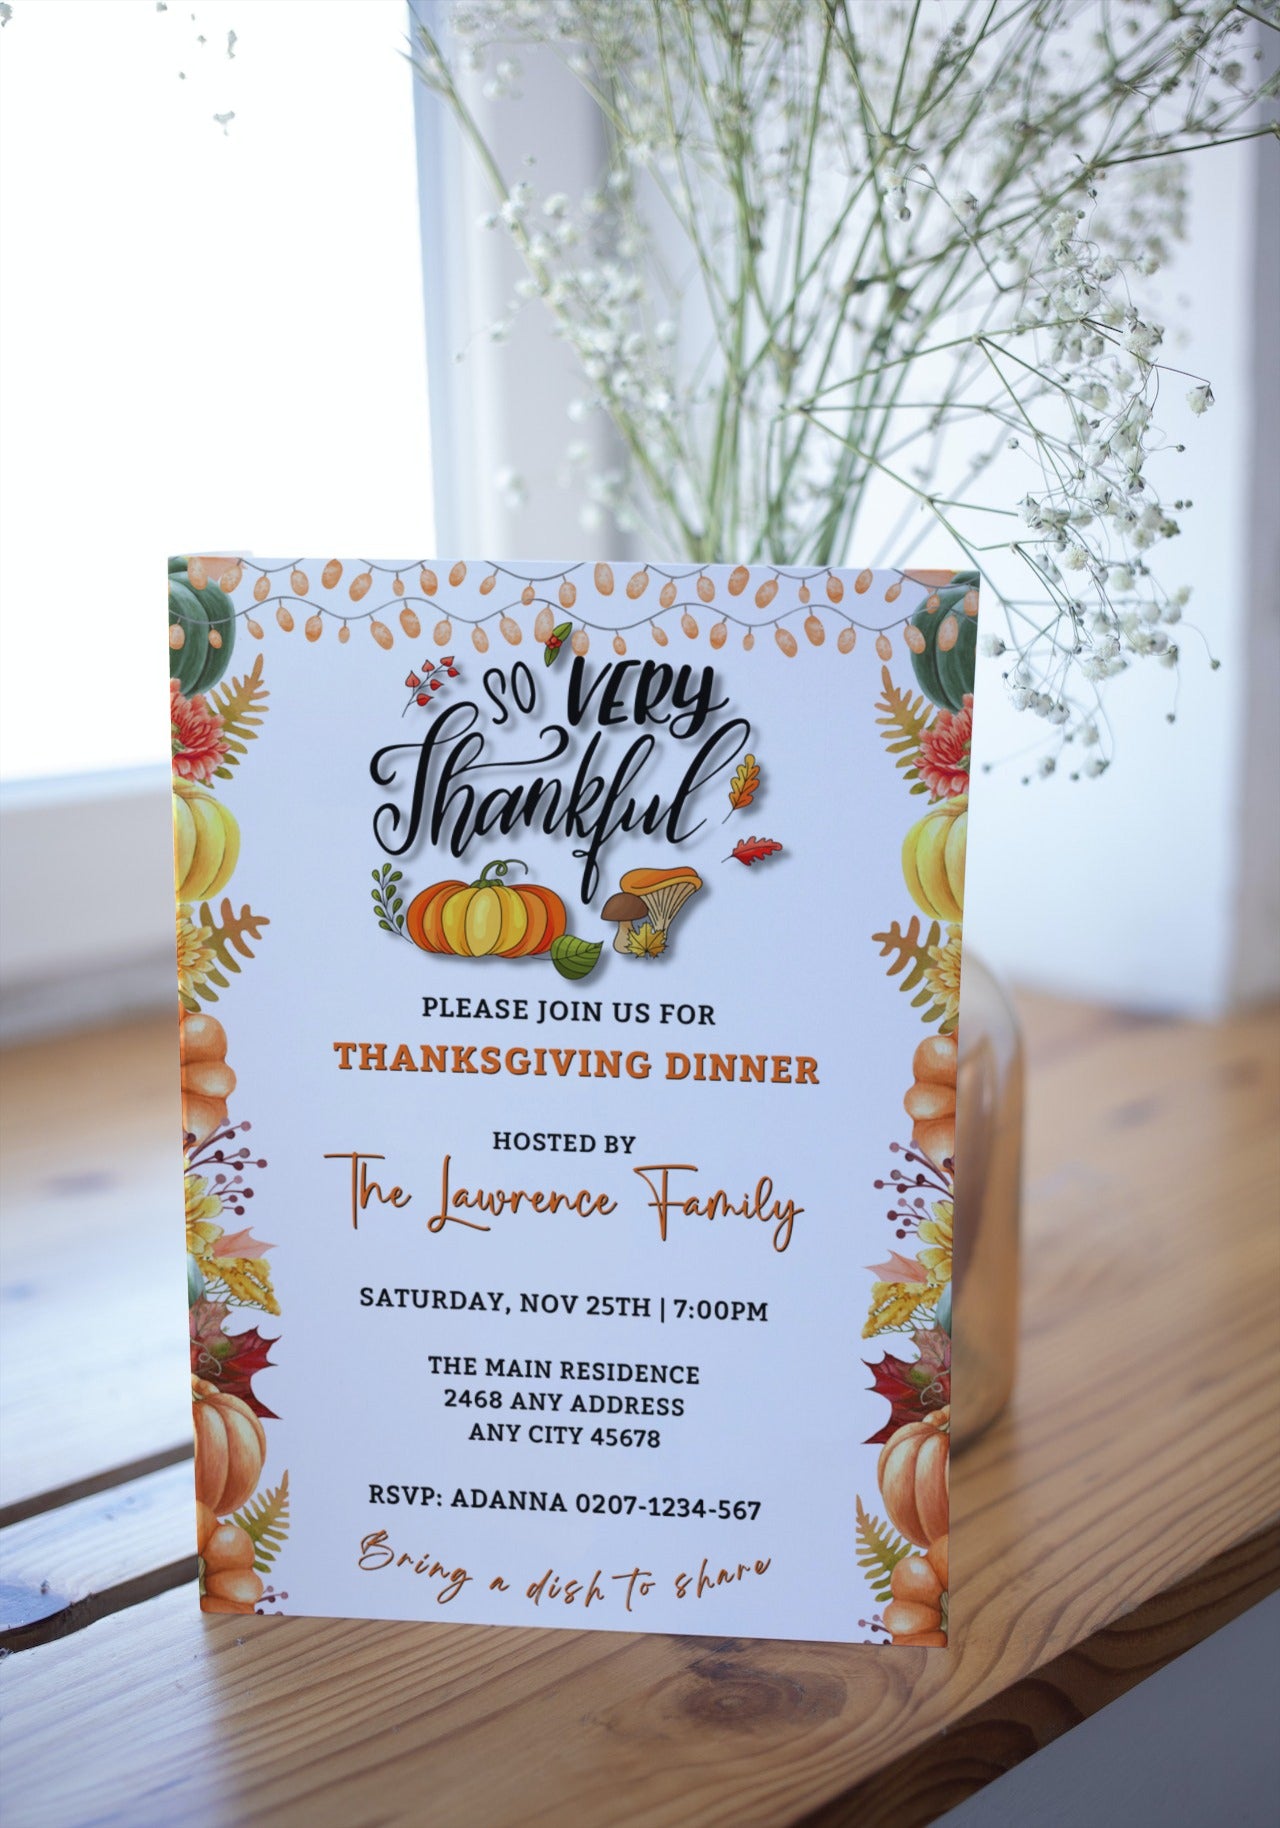 Invitation card featuring fall leaves and pumpkins for a customizable Thanksgiving Evite, editable via Canva for text, email, and messenger app sharing.